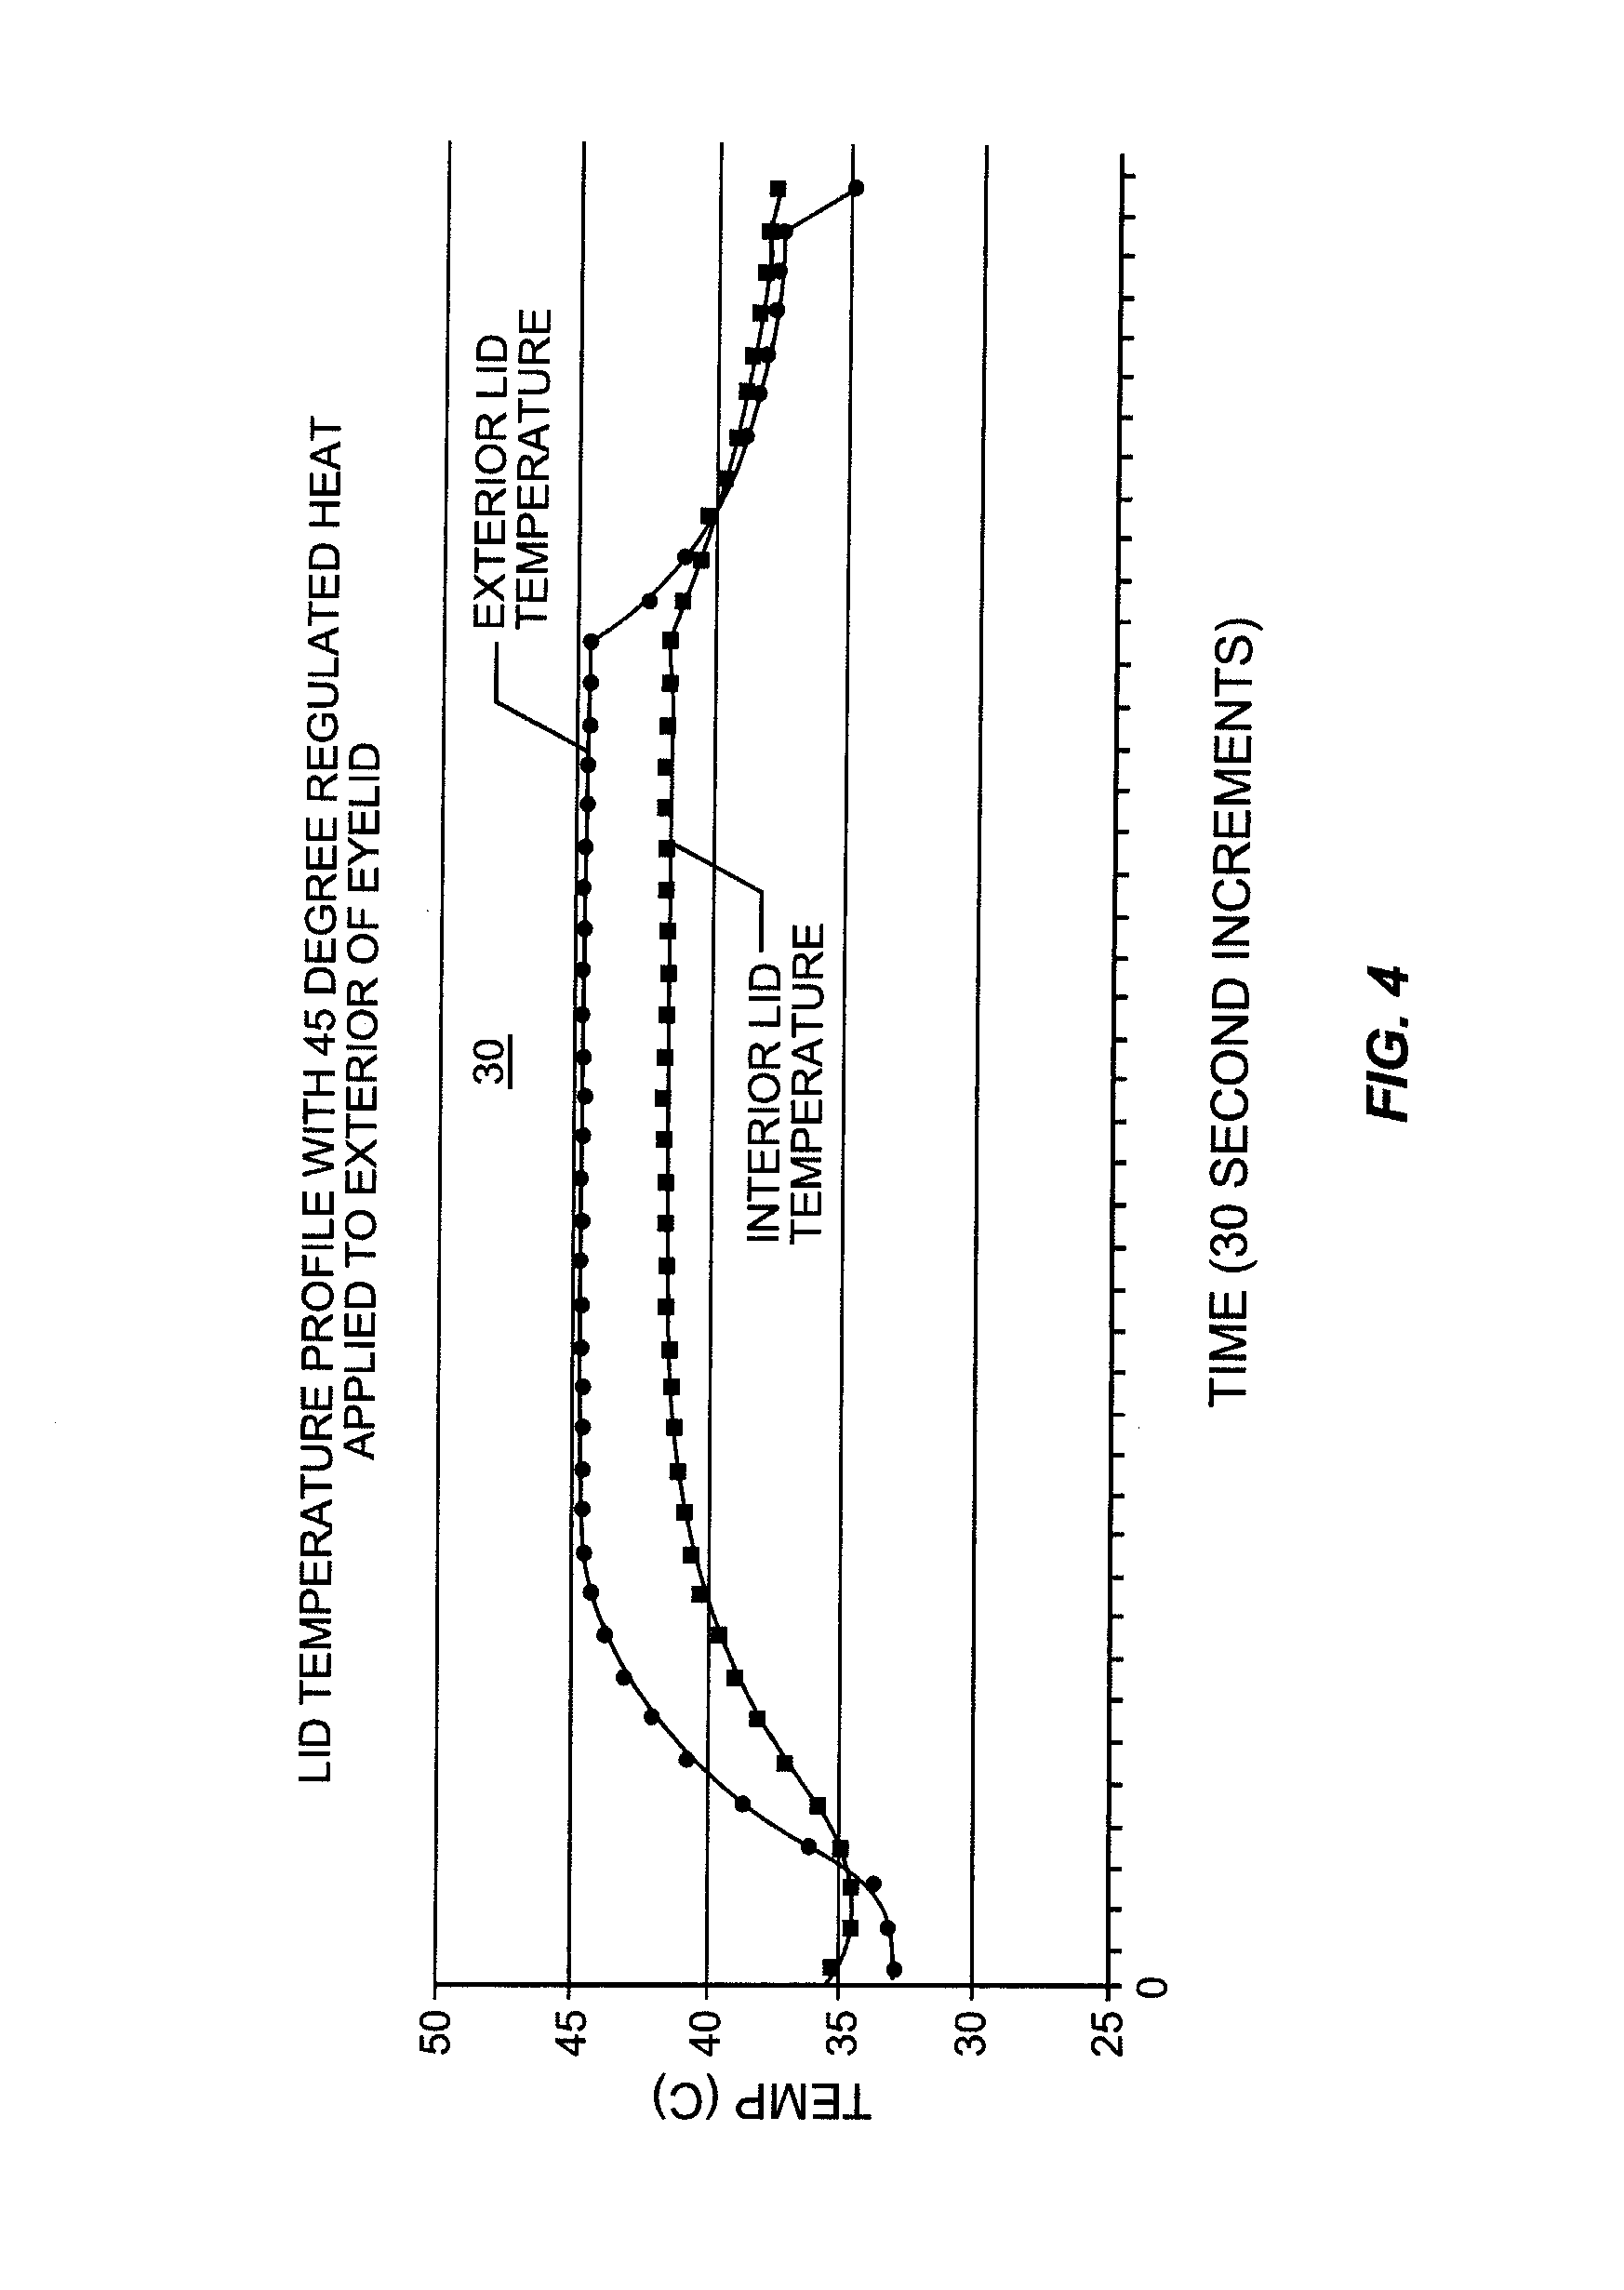 Apparatus for inner eyelid treatment of meibomian gland dysfunction